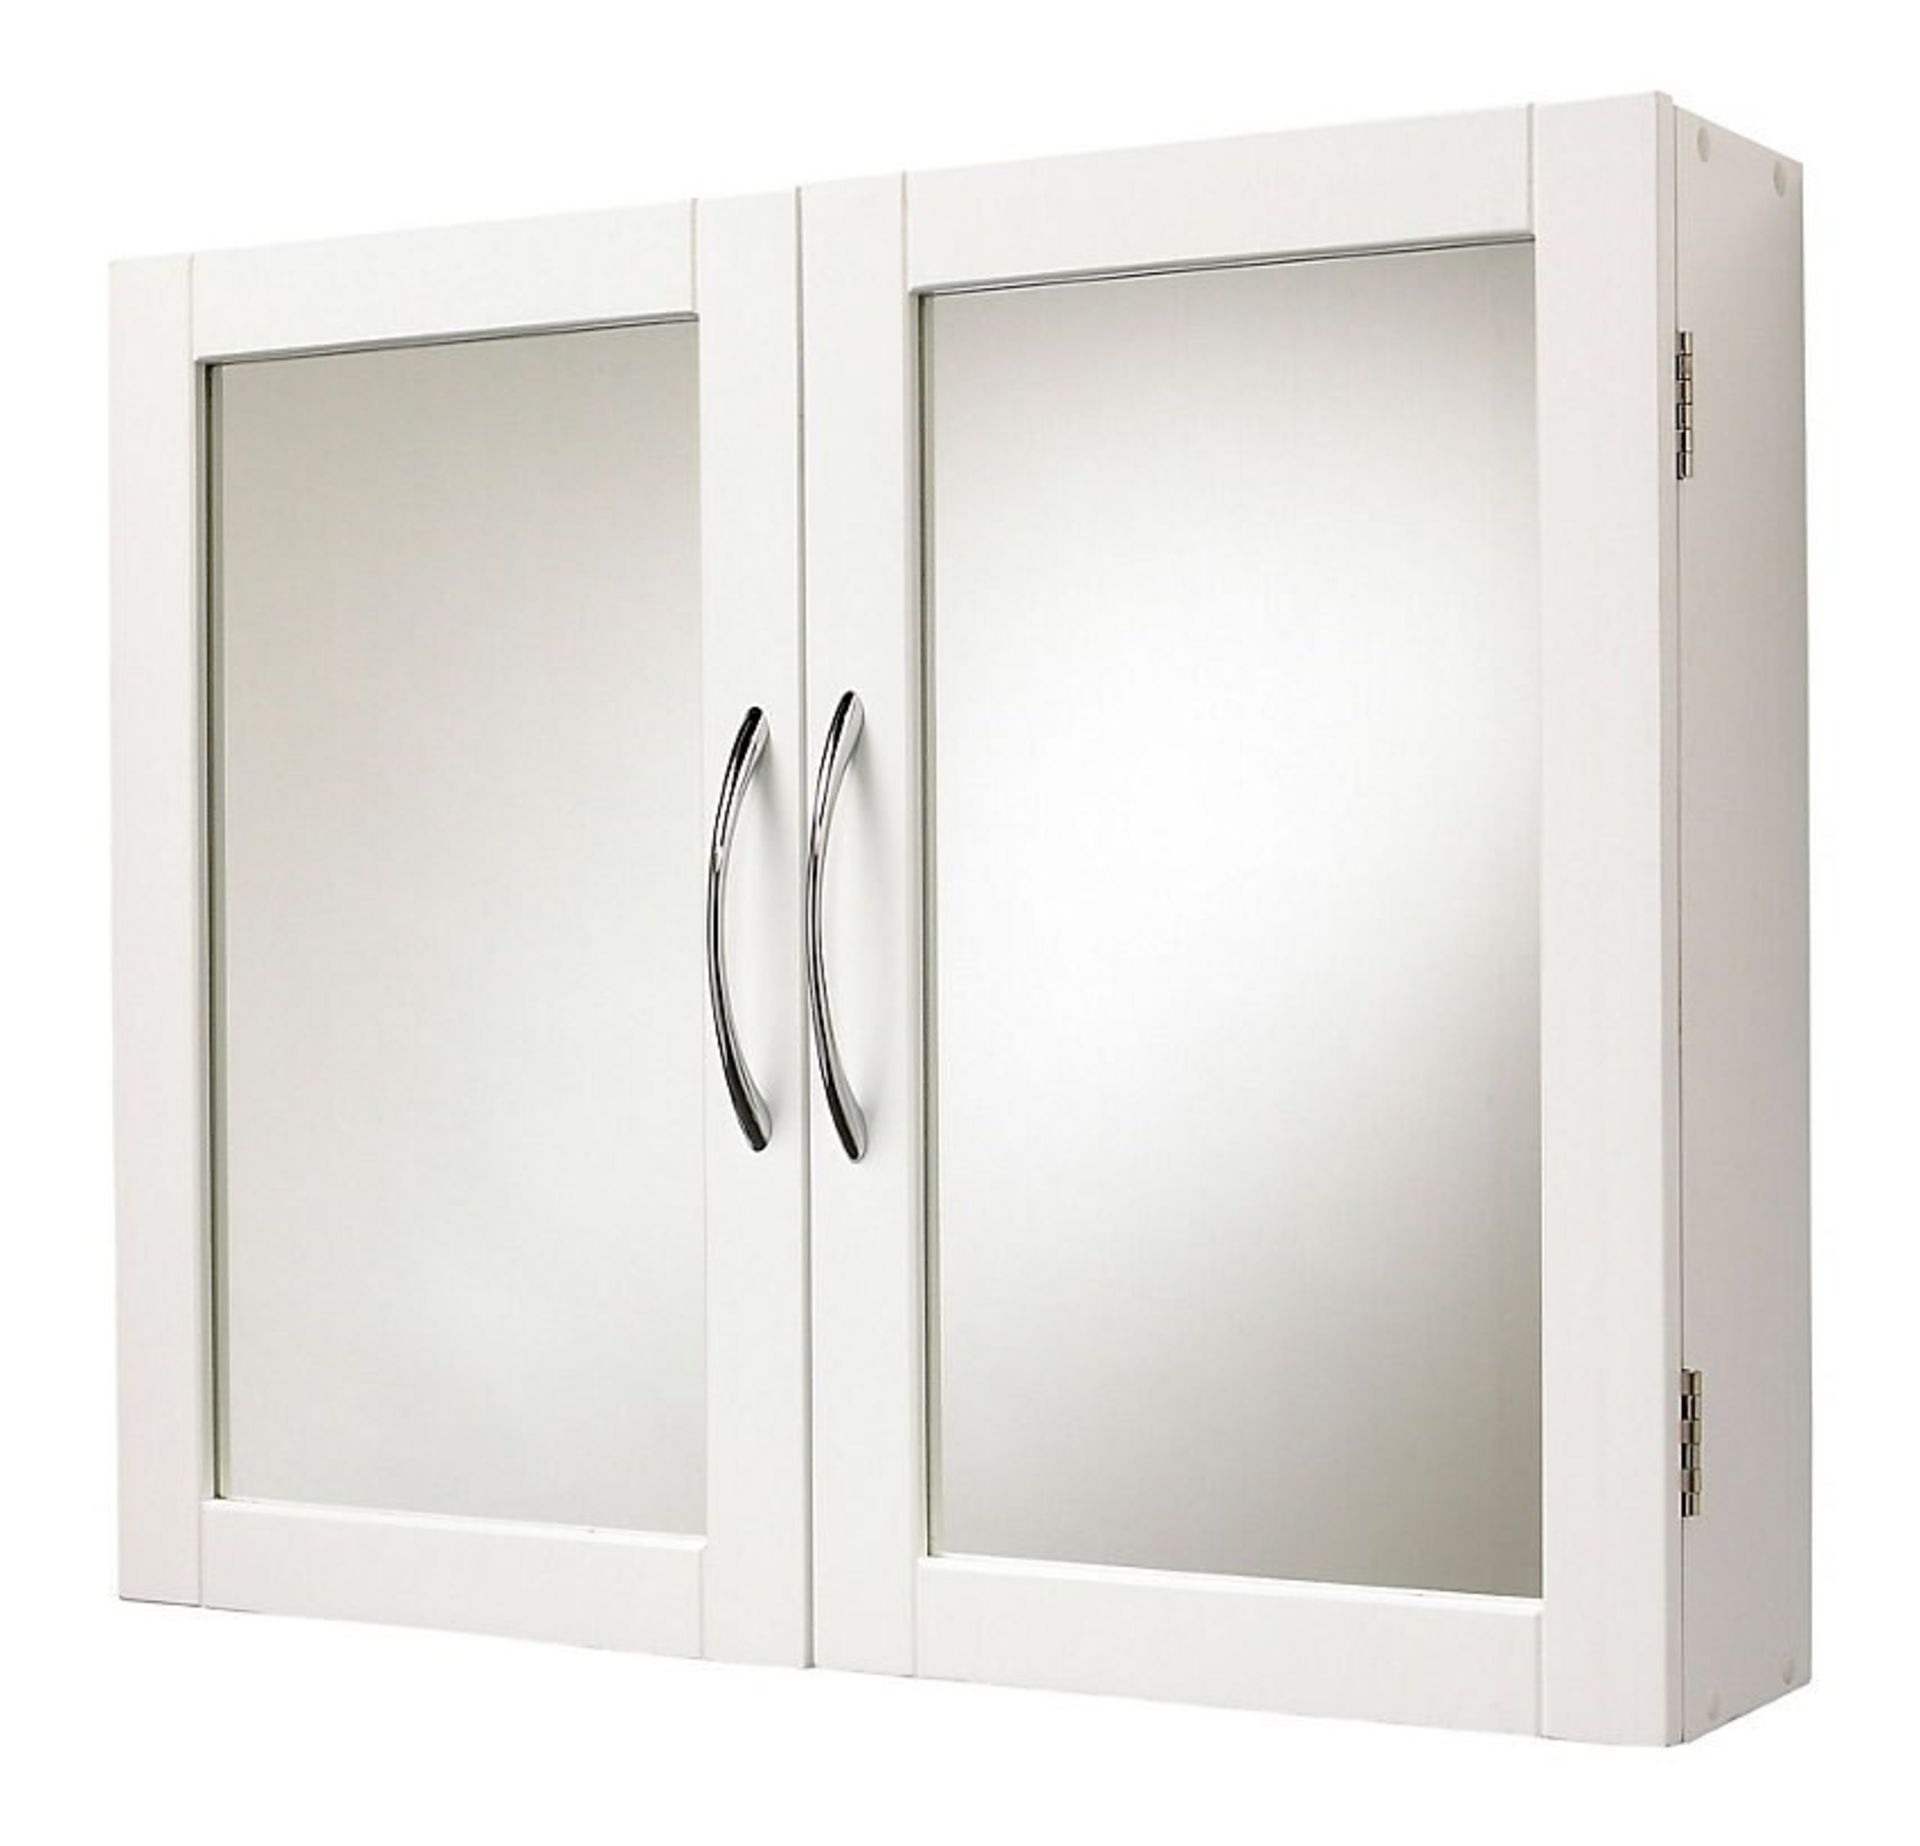 (JL31) Lenna Double door White Mirror cabinet. Made from responsibly sourced, Forest Friendly ...